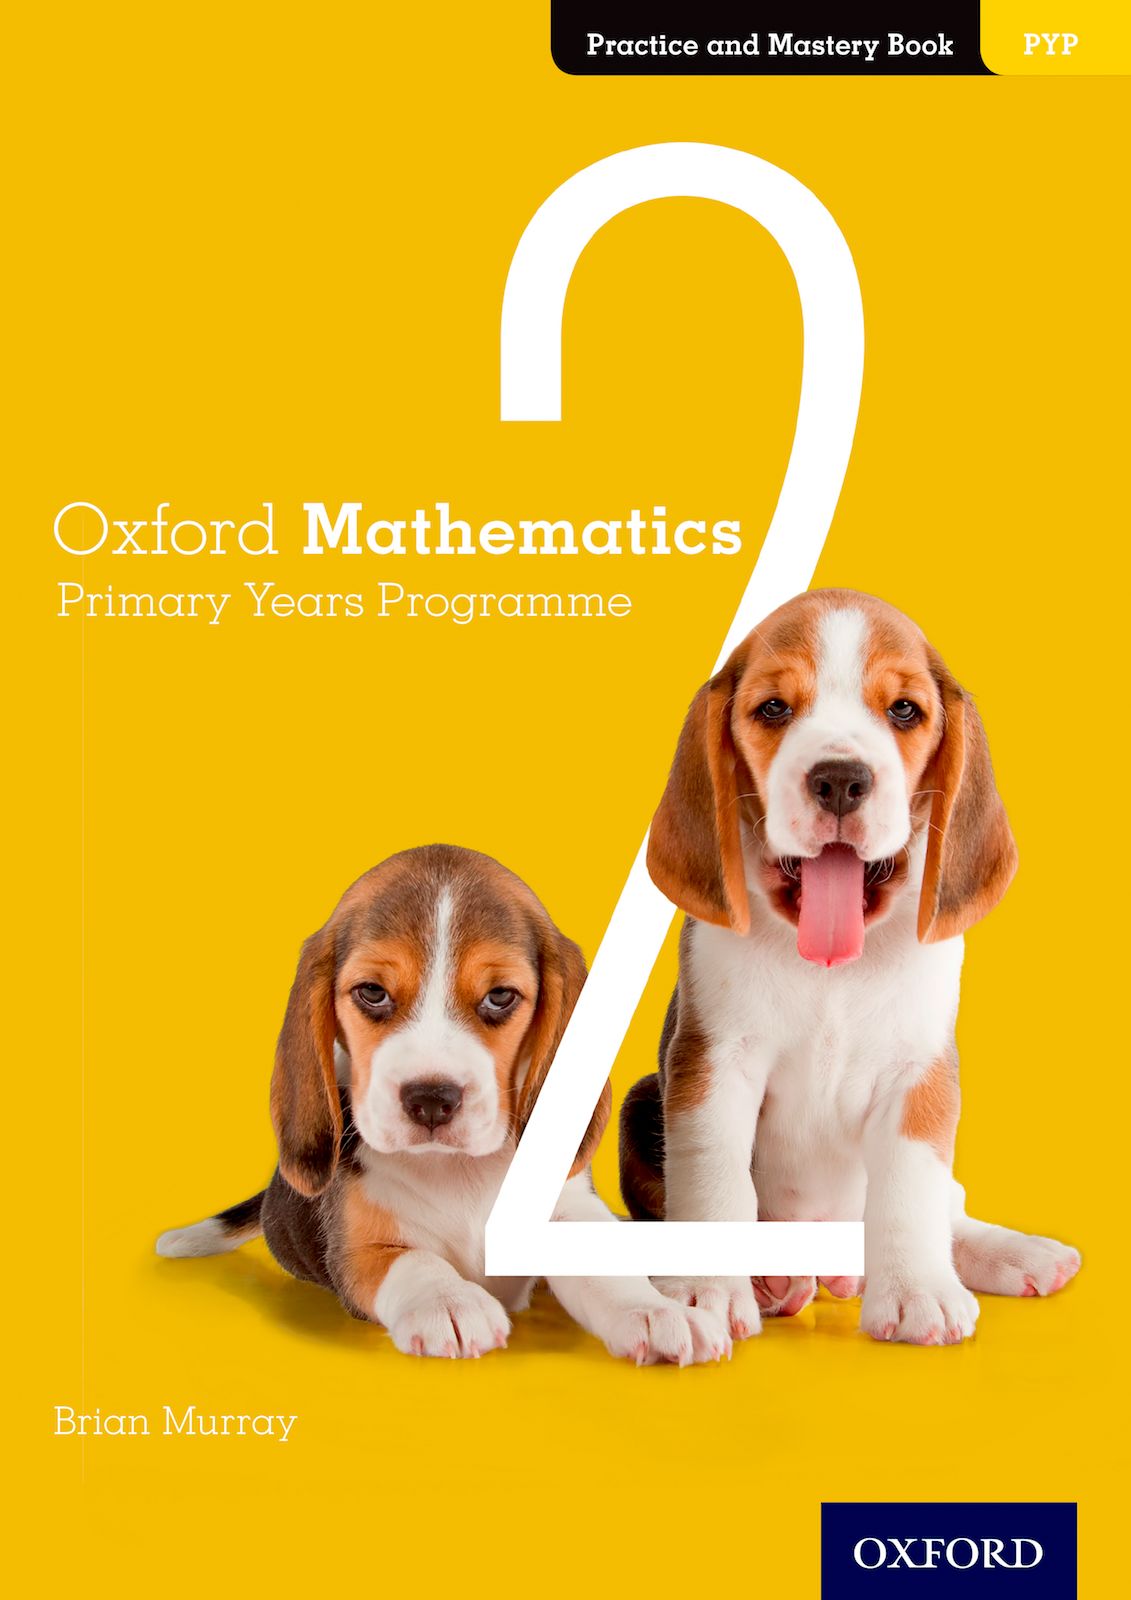 Featured image for “Oxford Mathematics Primary Years Programme Practice and Mastery Book 2”